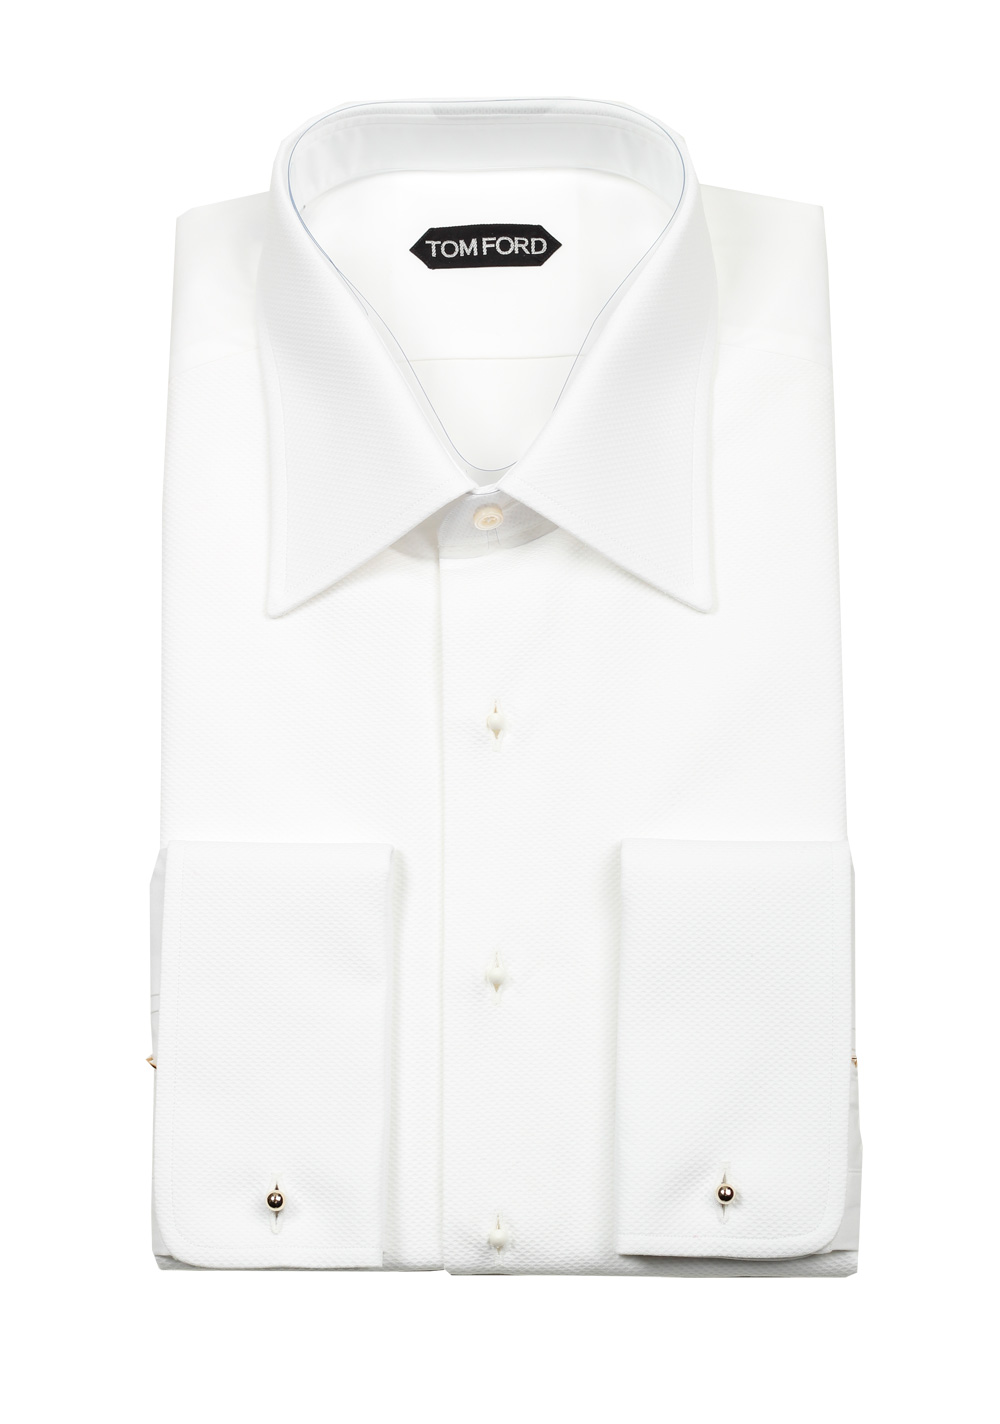 TOM FORD Solid White Pique Tuxedo Shirt With French Cuffs | Costume Limité